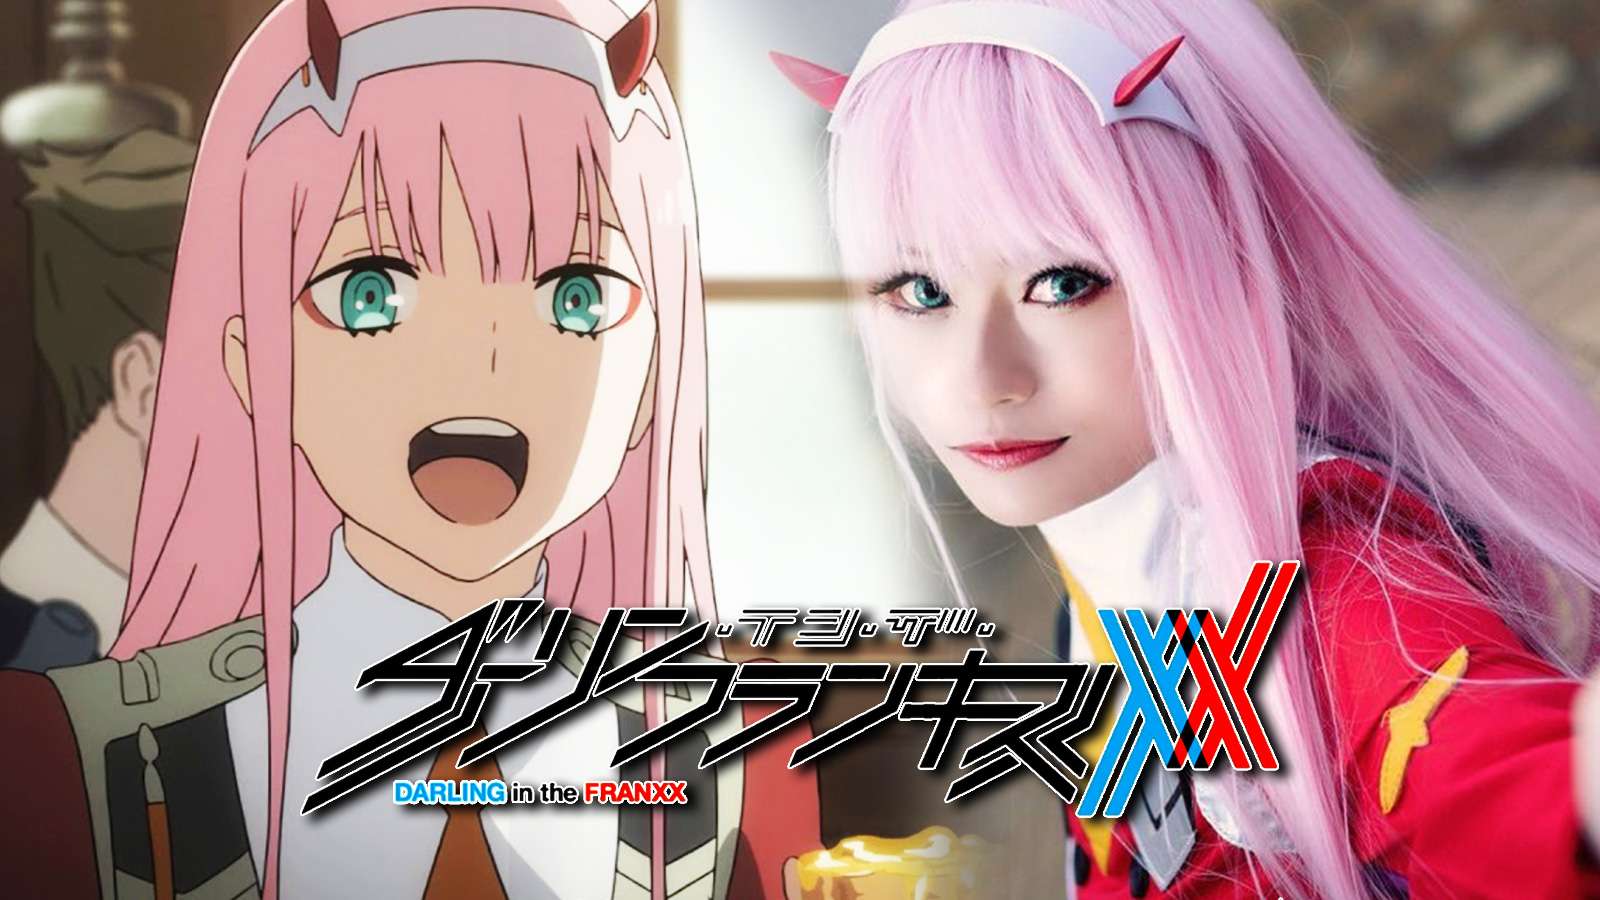 Screenshot of Zero Two from Darling in the Franxx anime next to cosplayer.